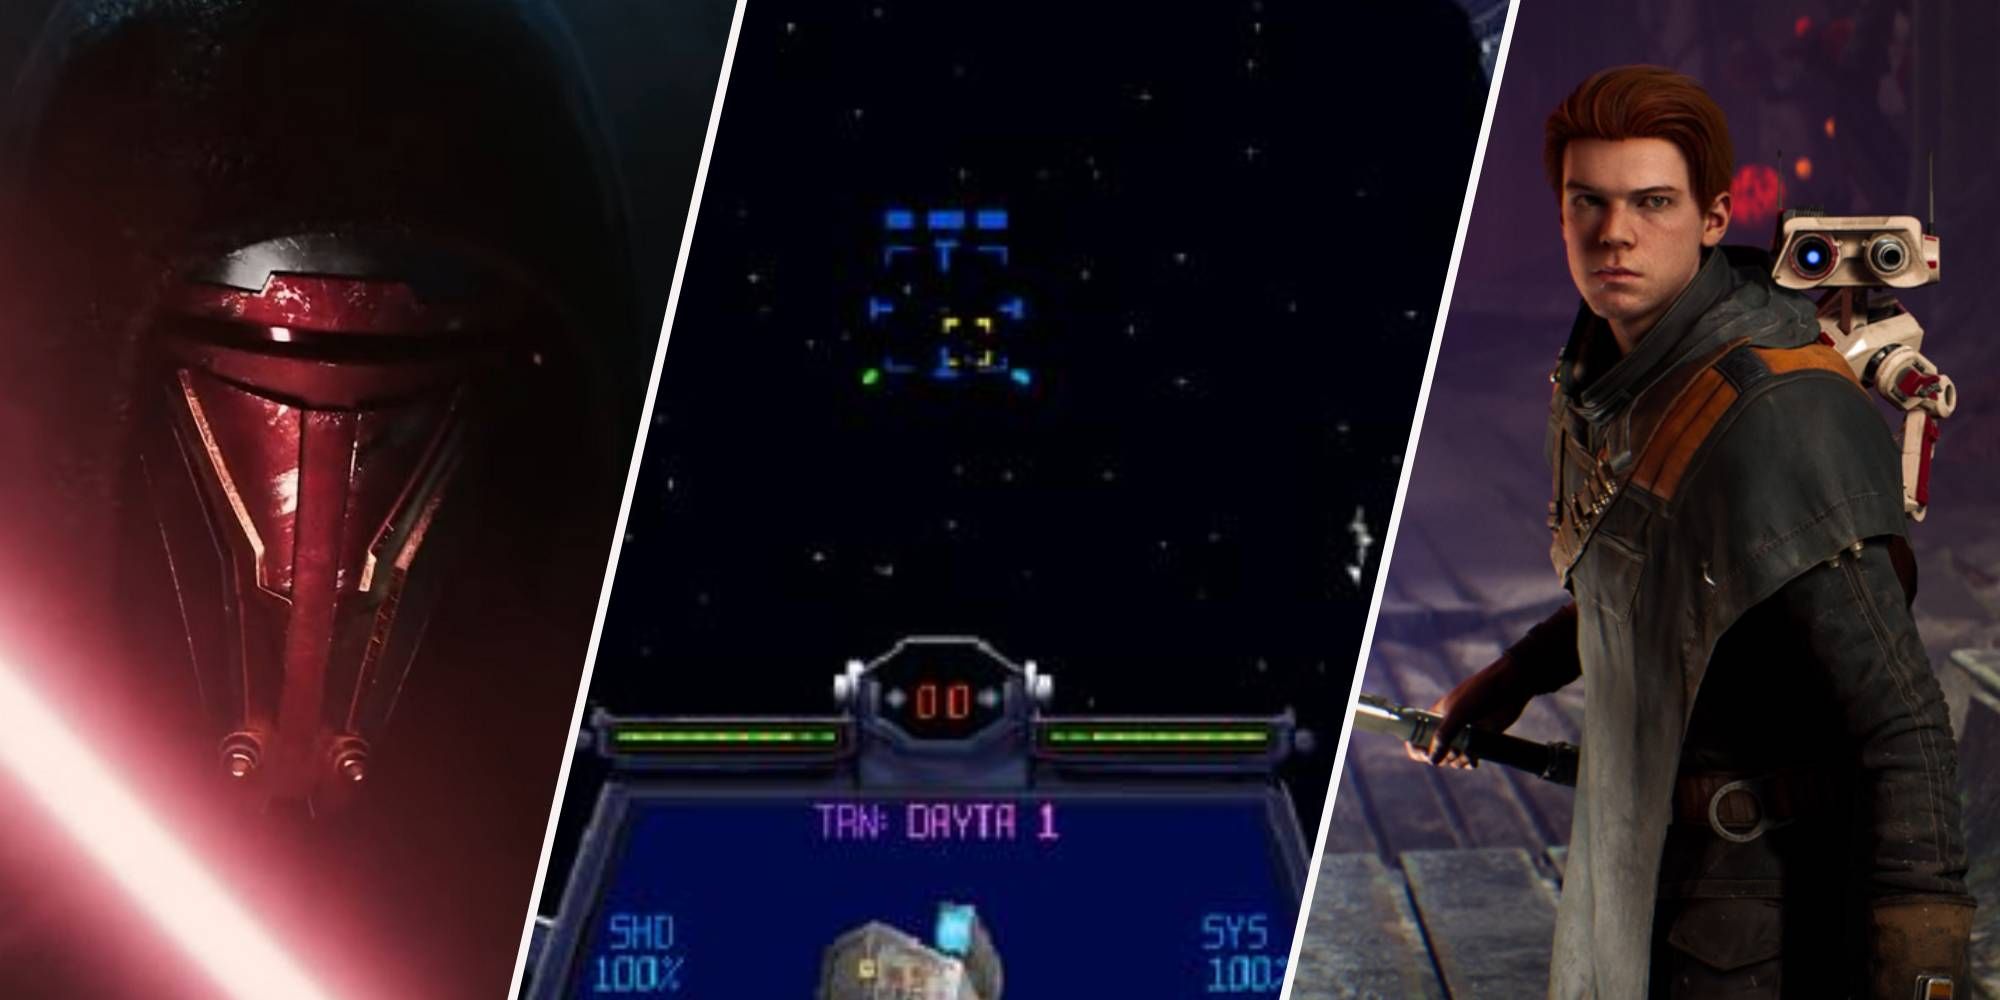 Upcoming Star Wars games: Every new Star Wars game announced so